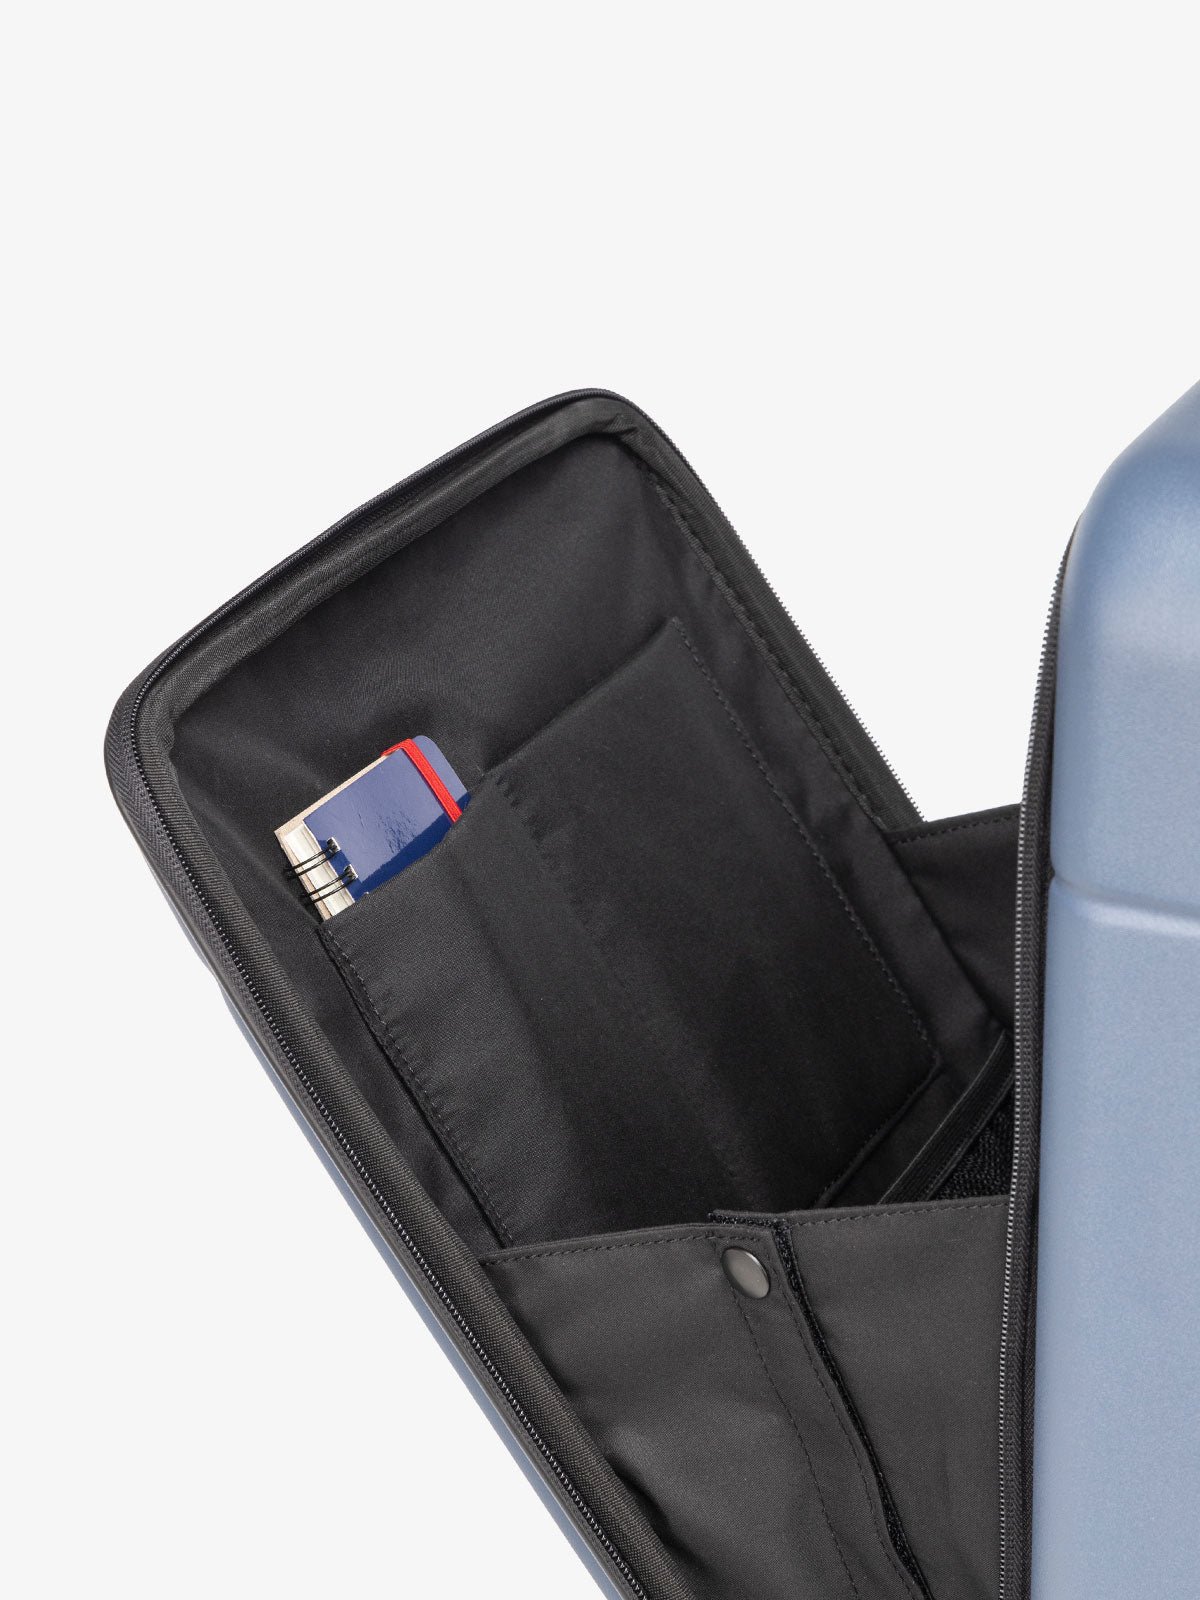 Hue carry on luggage with hard shell front pocket